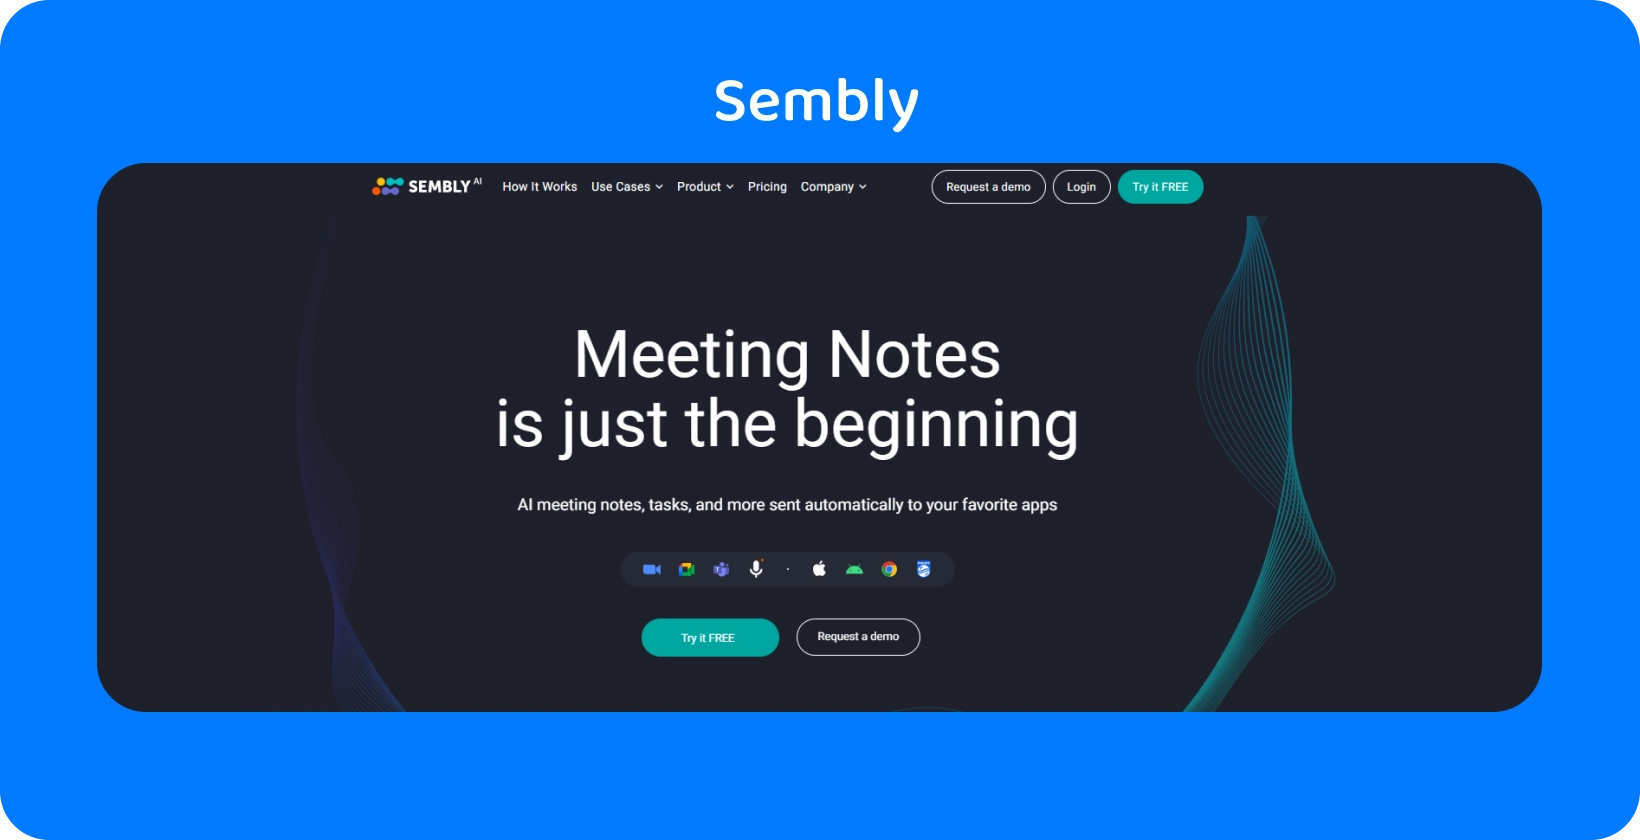 Semby's homepage promoting the smartest AI team assistant for meeting transcription, akin to Word dictation.